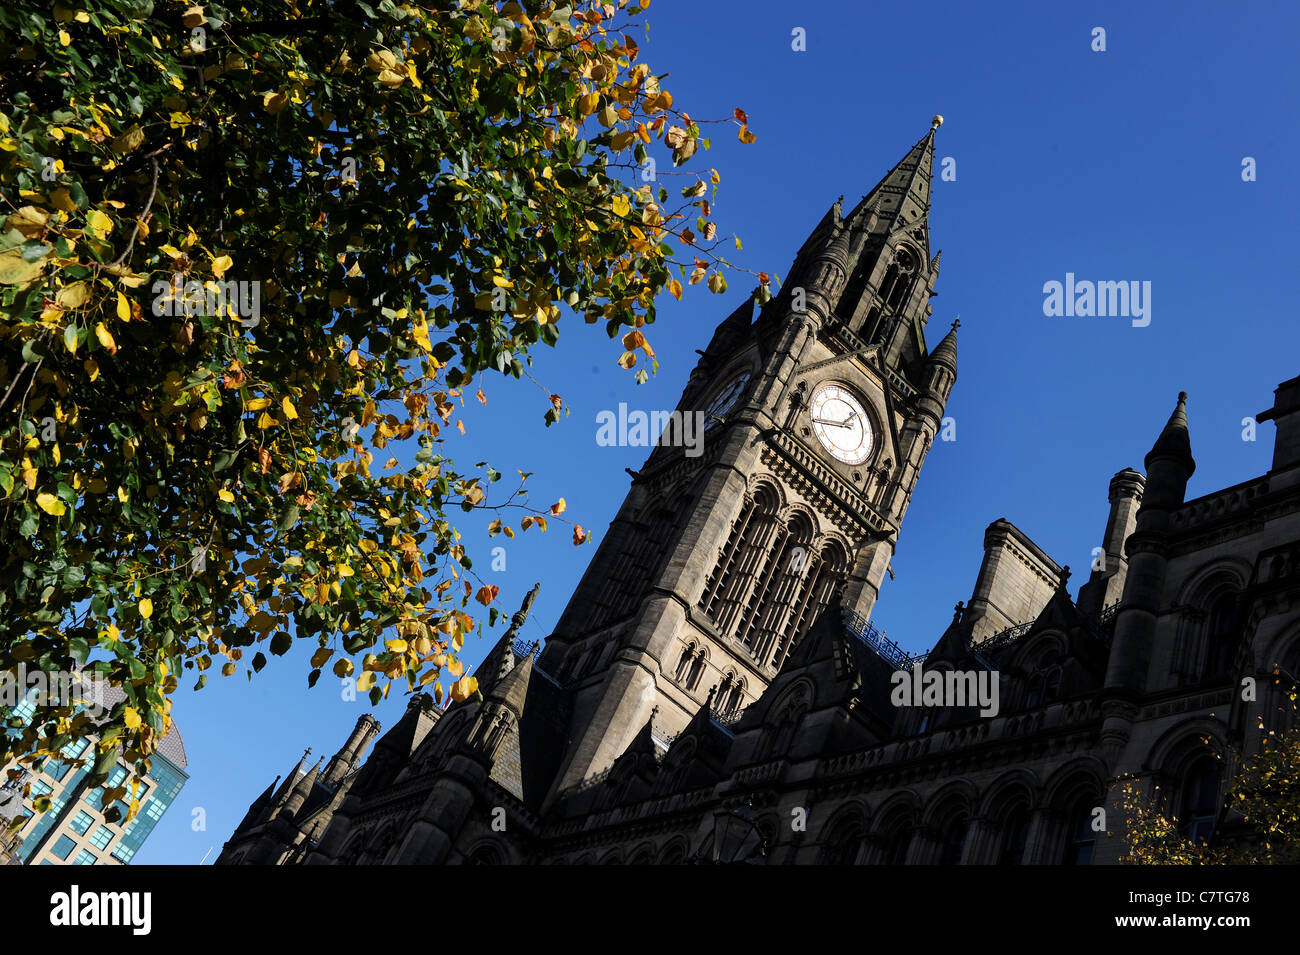 Victorian gothic elegance of Manchester Town Hall, Albert Square, Manchester, England. Picture by Paul Heyes, September 28, 2011 Stock Photo